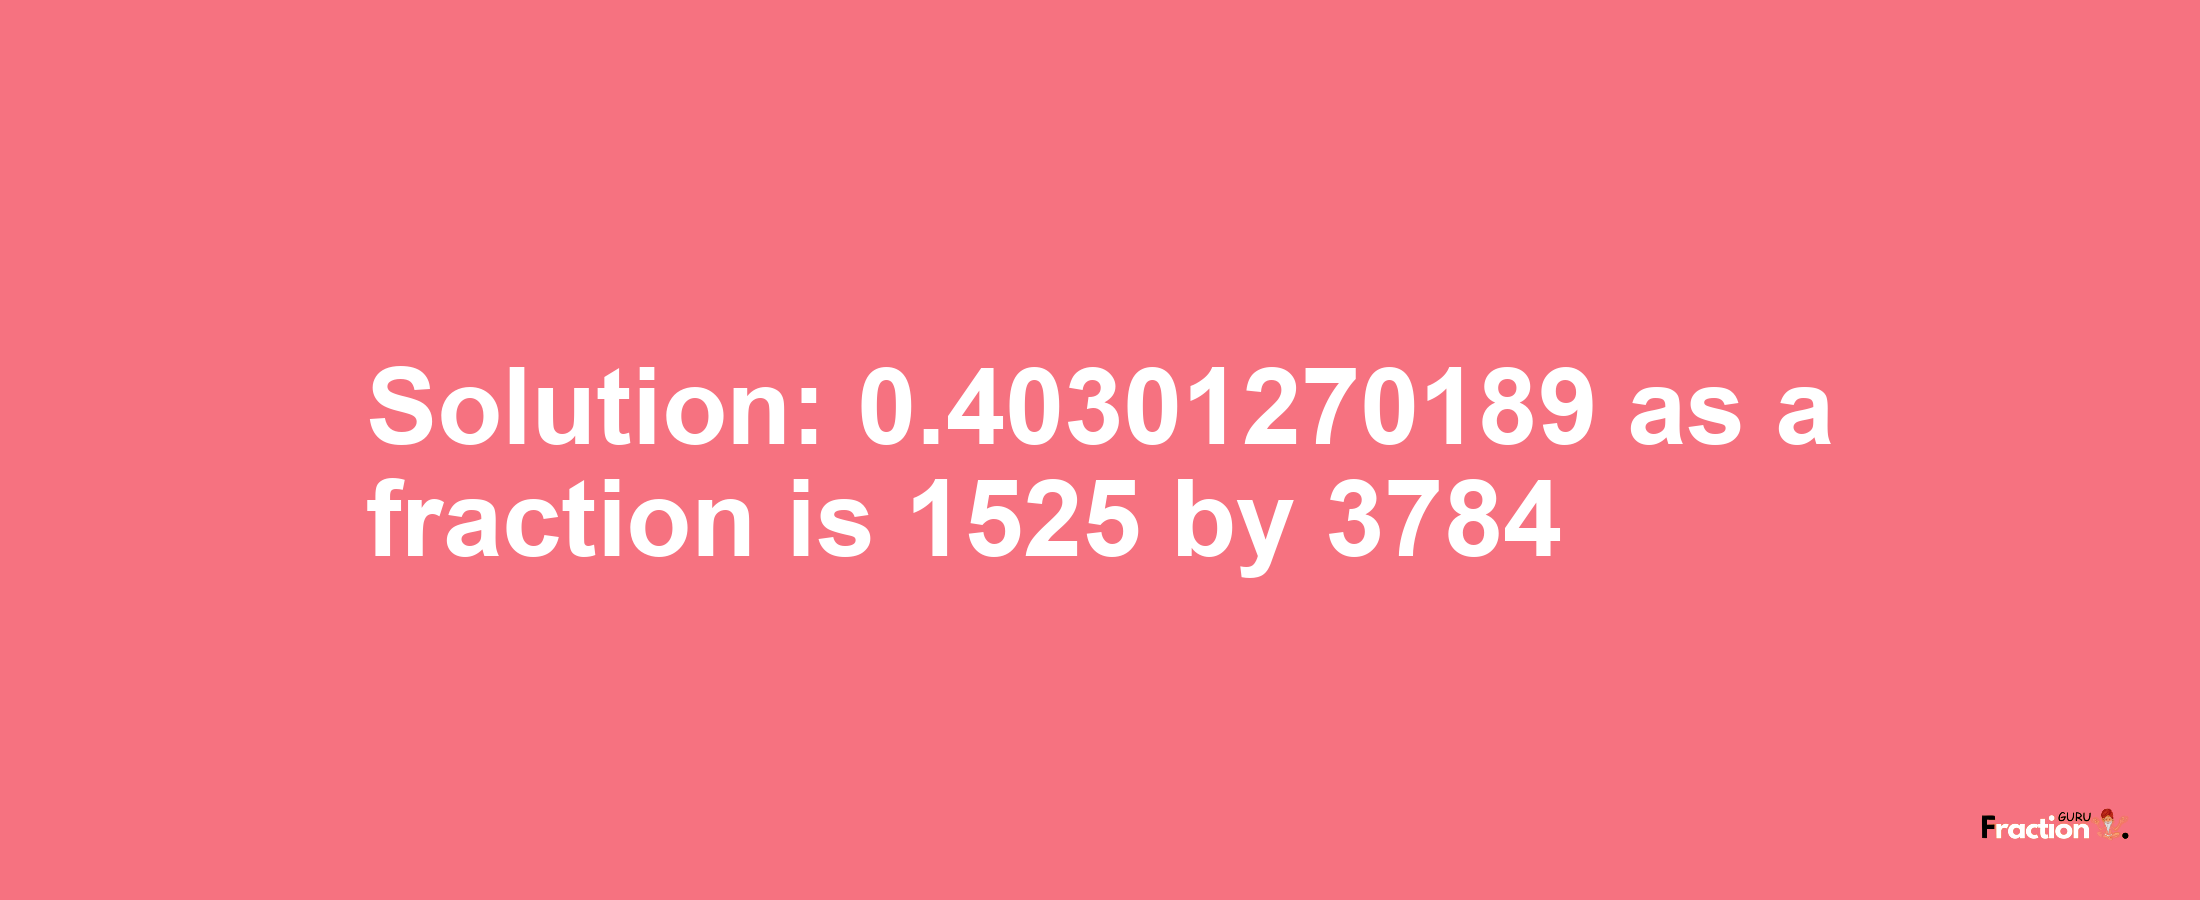 Solution:0.40301270189 as a fraction is 1525/3784